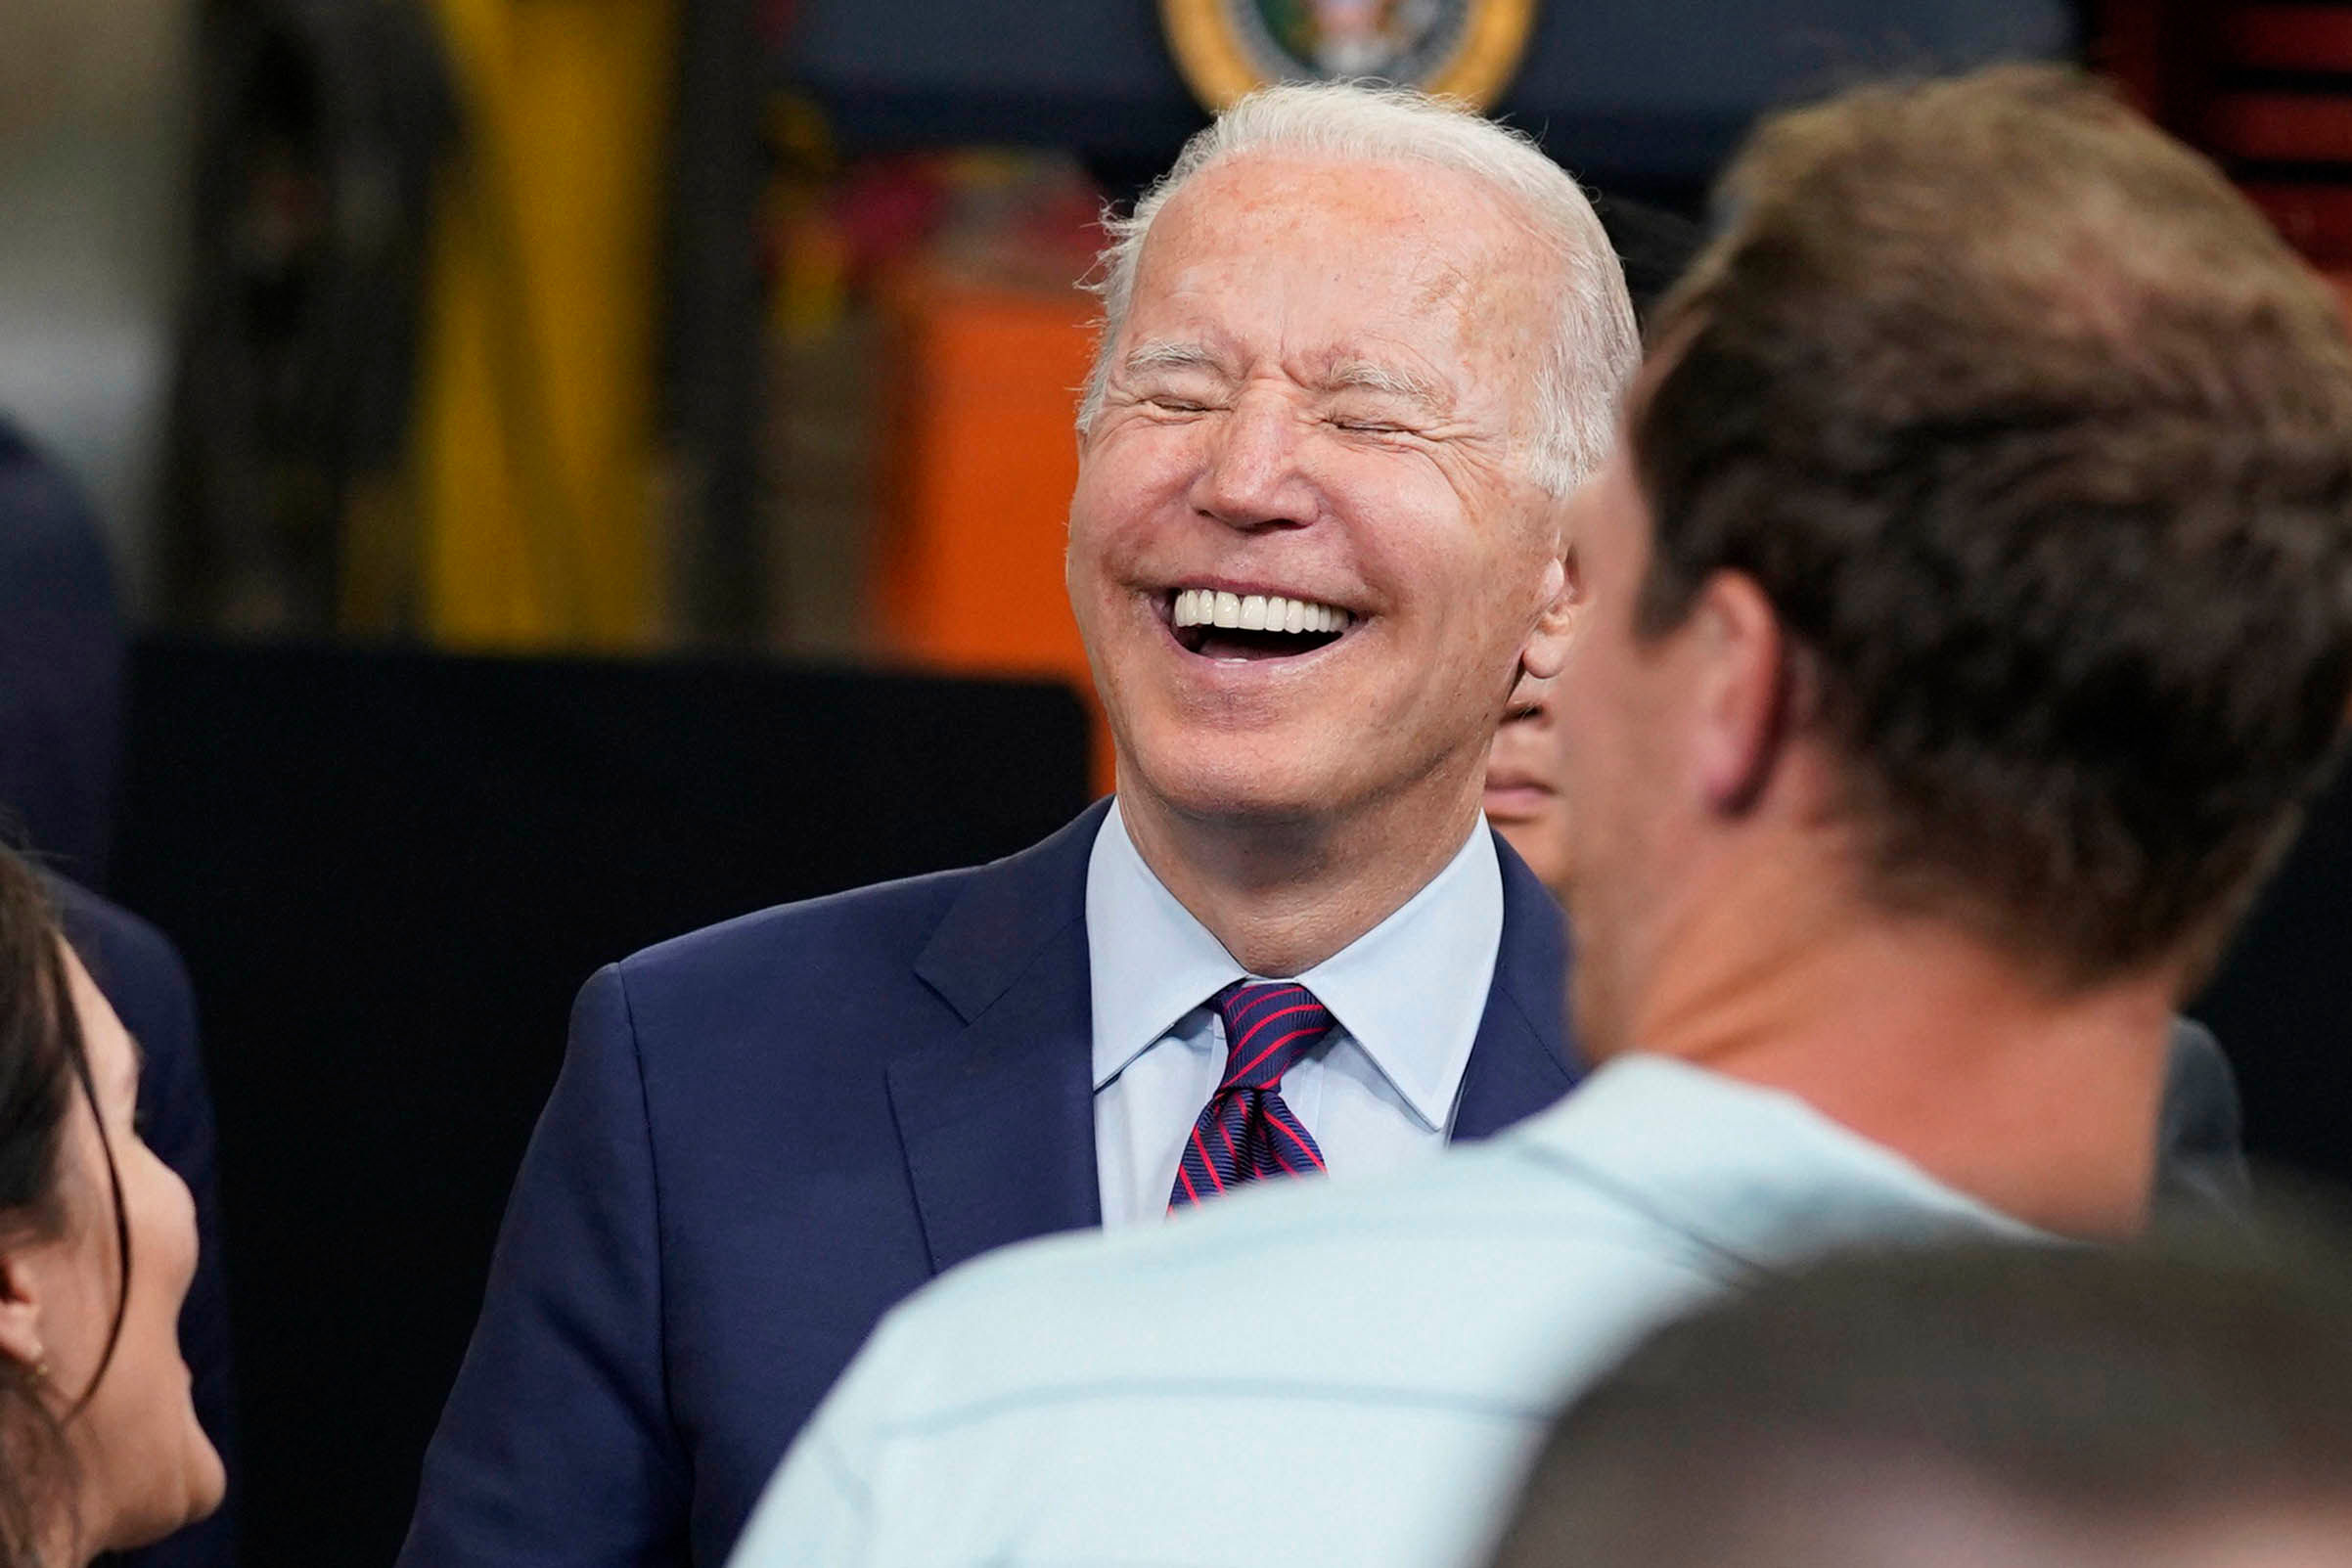 ‘It’s a holiday weekend’: Biden denies to answer questions on Afghanistan. Watch